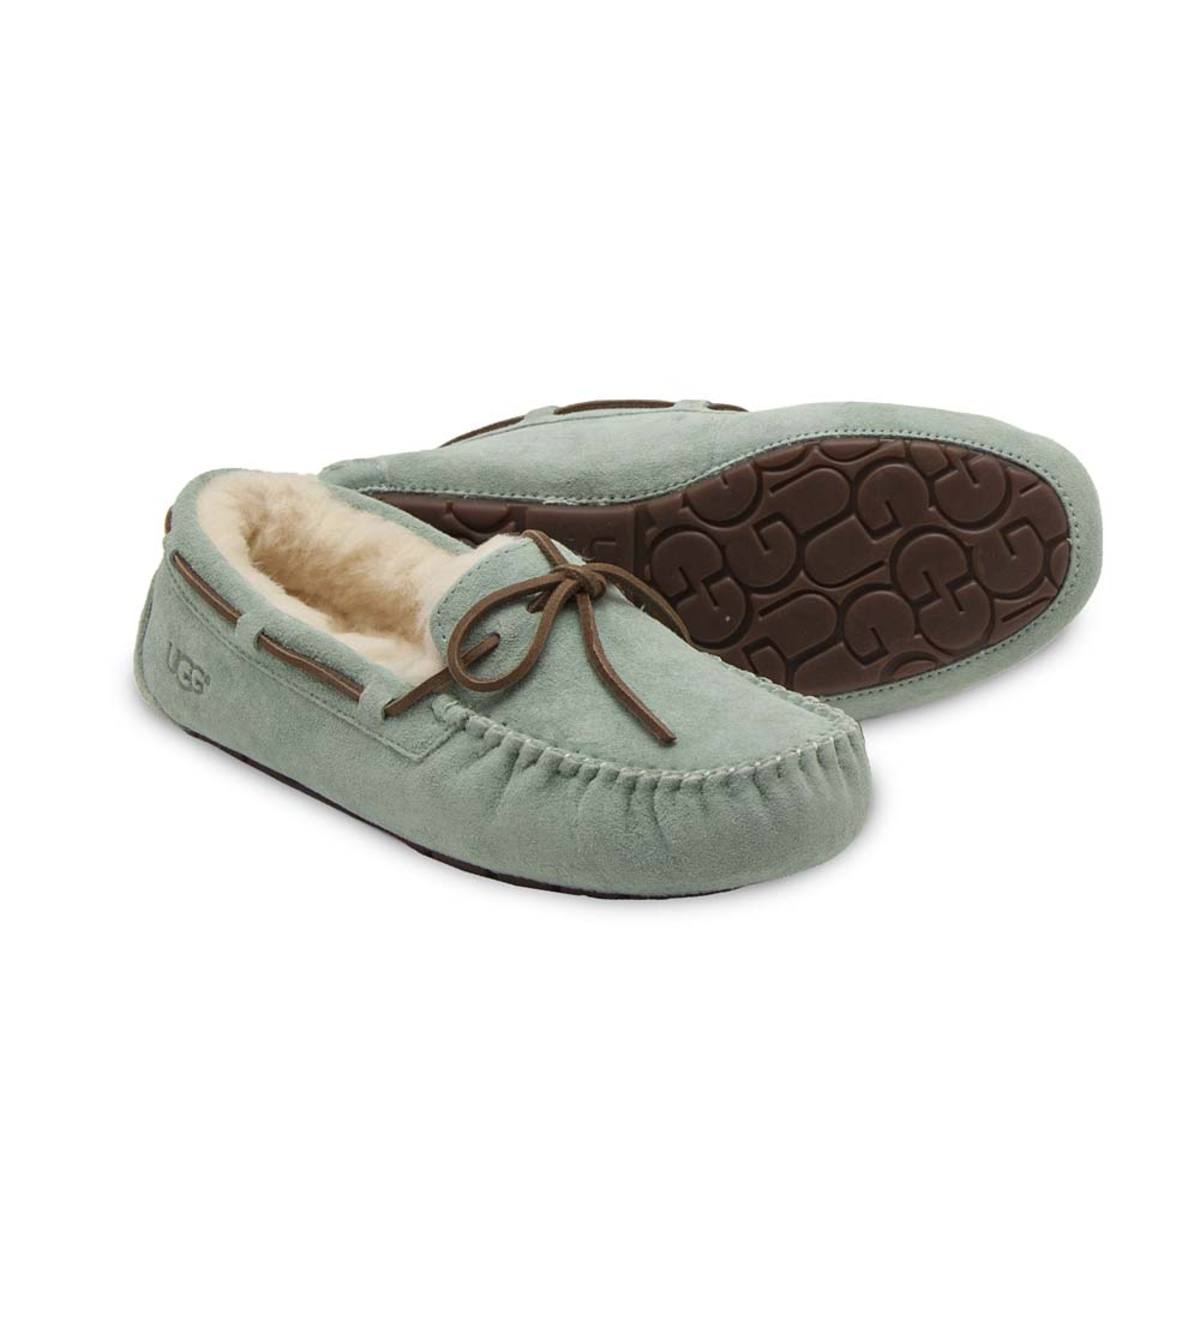 ugg slippers sale size 5